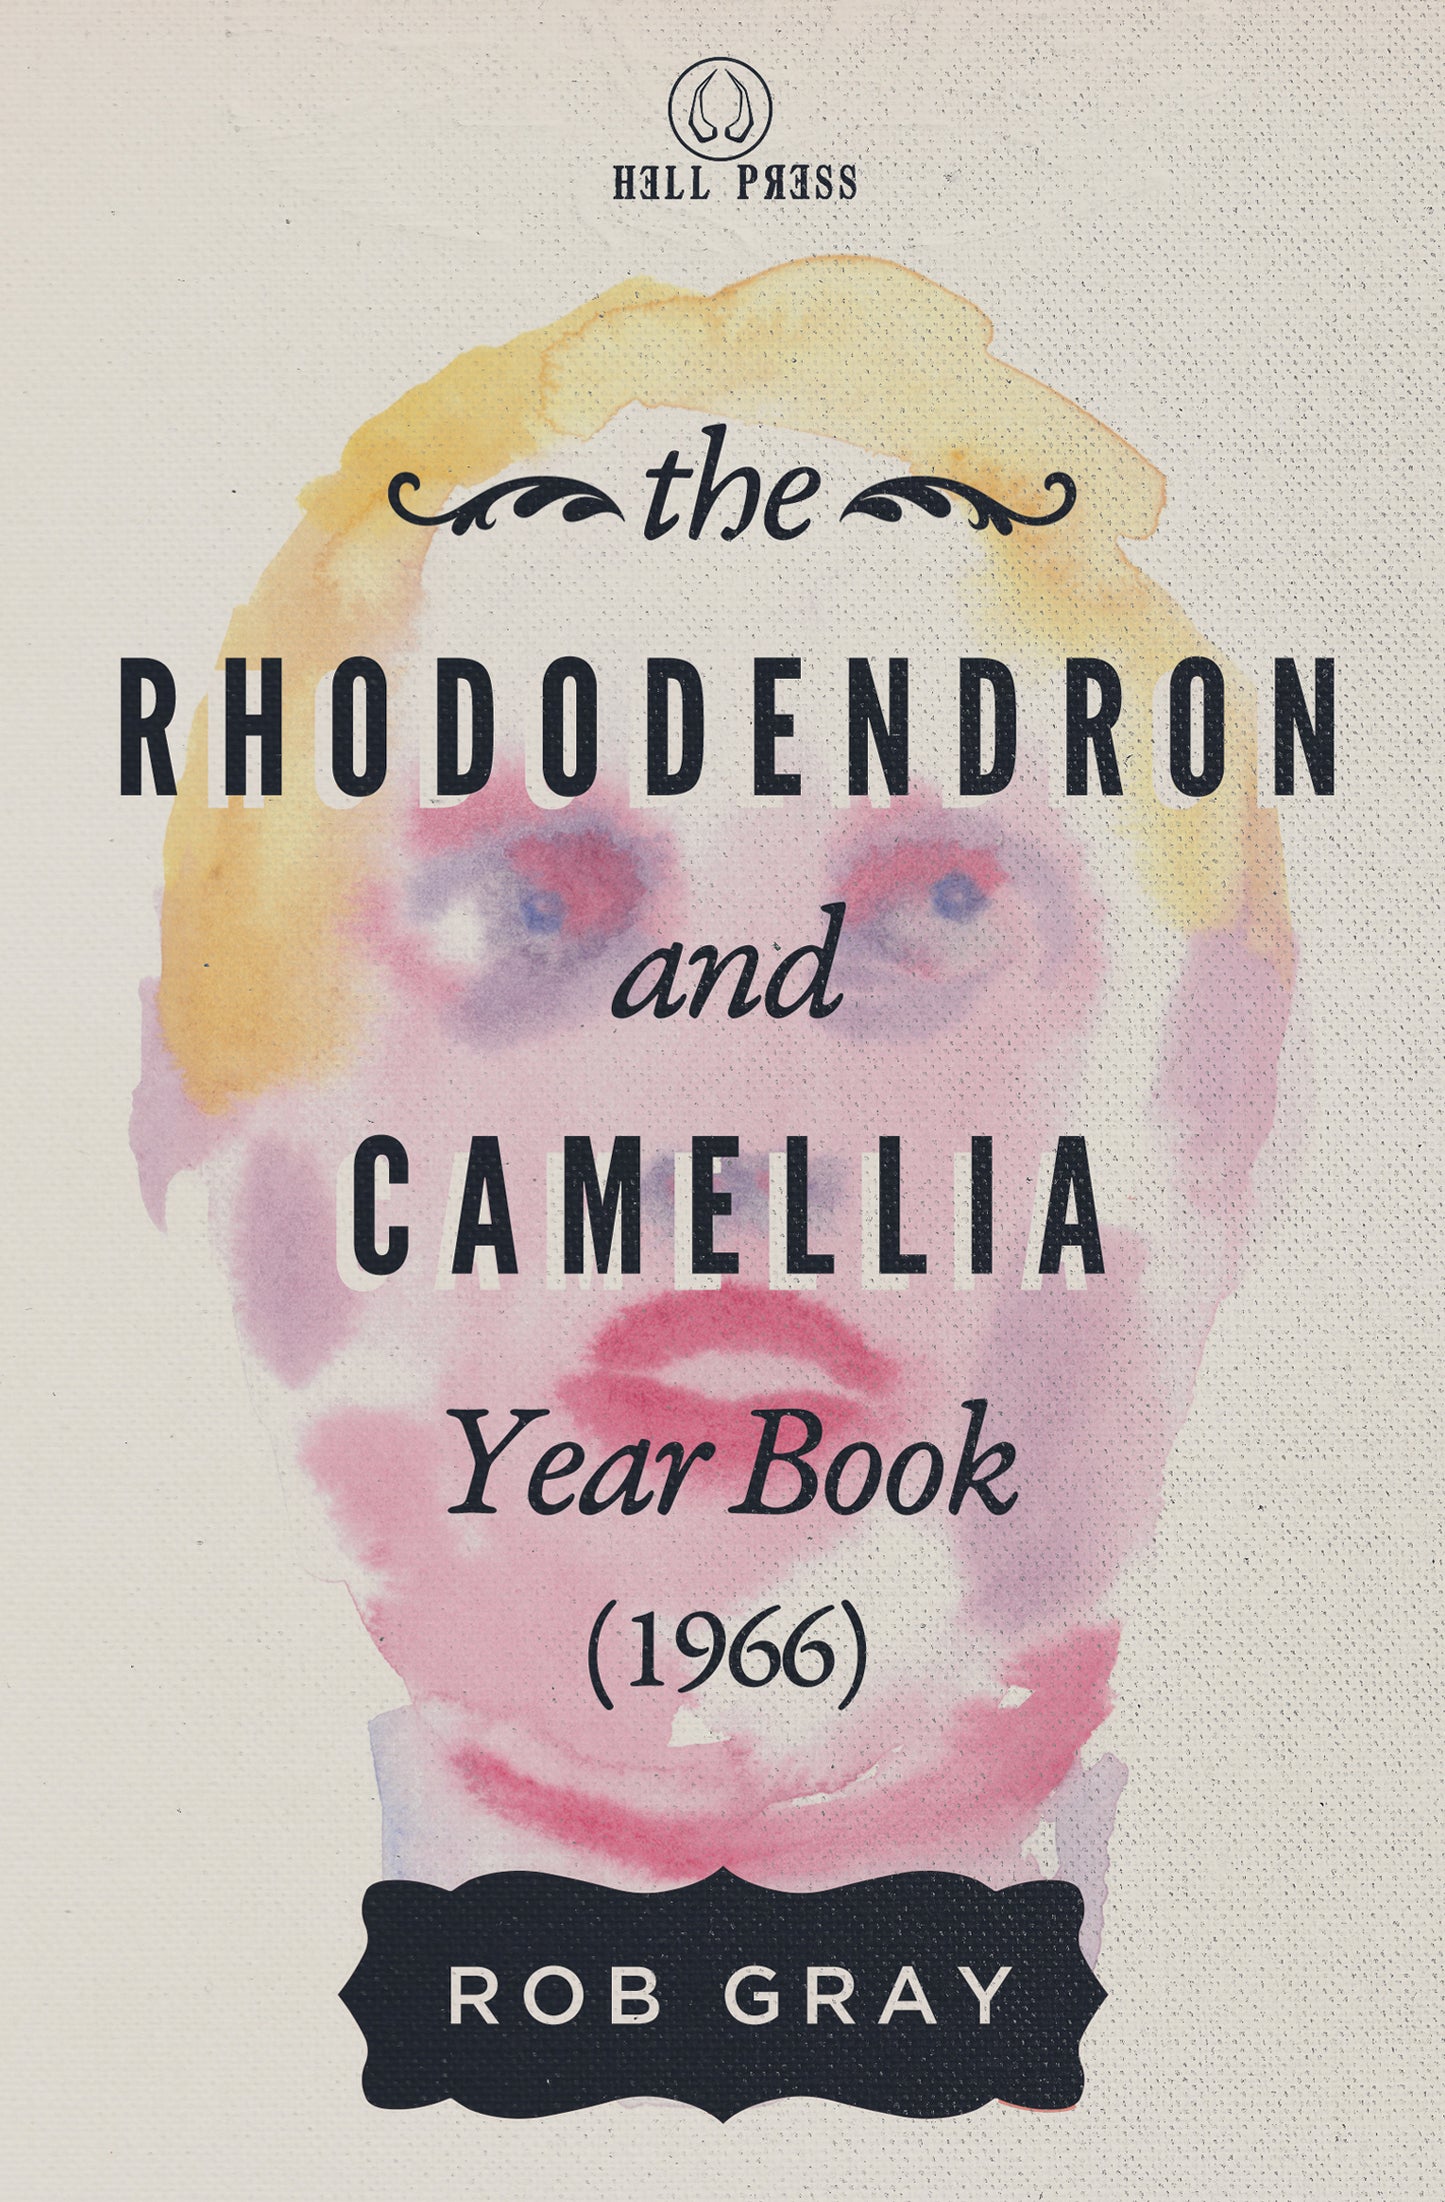 The Immaculate Collection / The Rhododendron and Camellia Year Book (1966) by Rob Gray